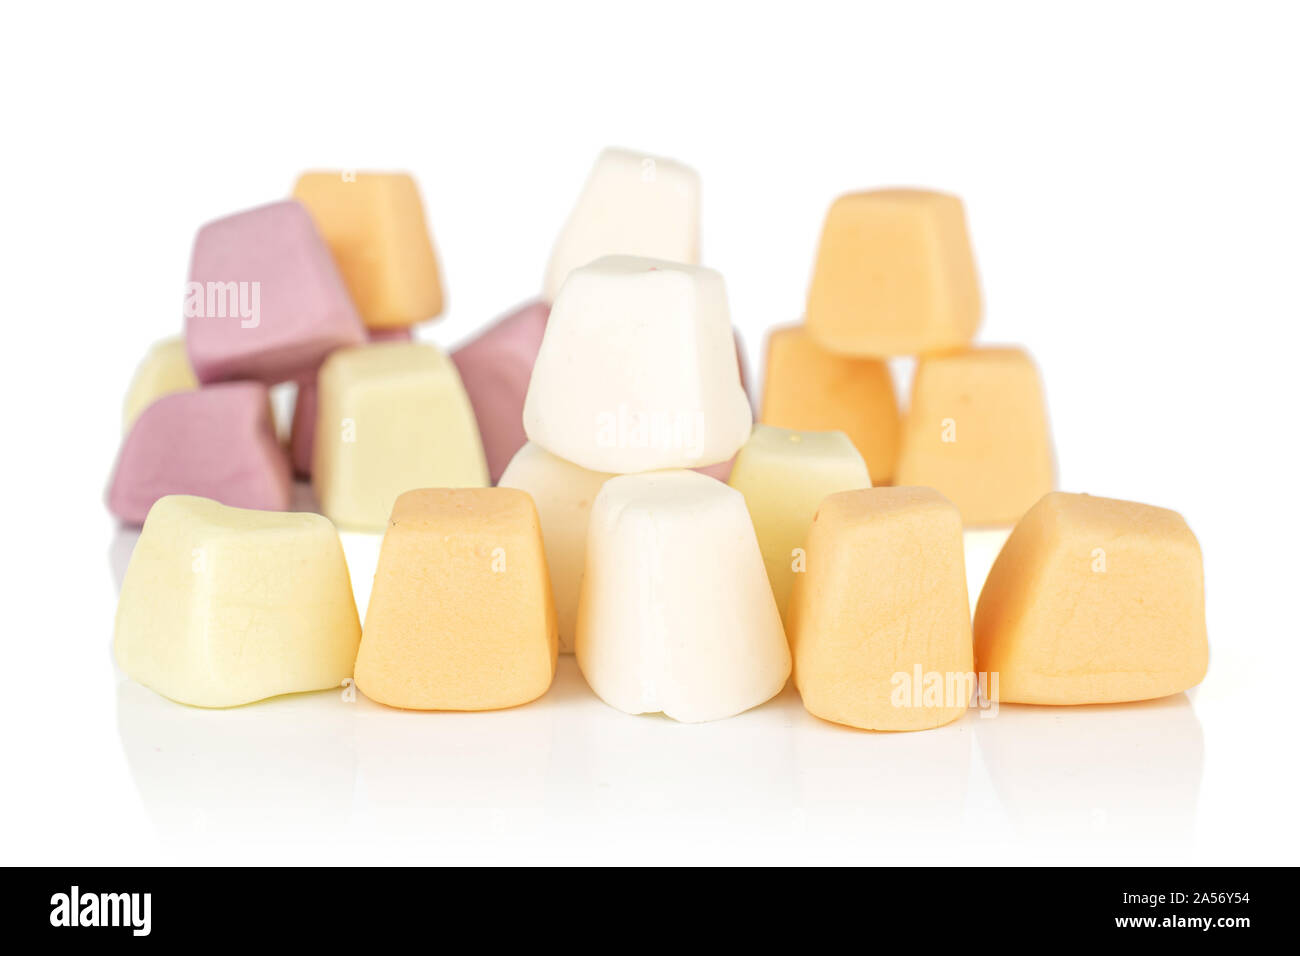 Lot of whole soft pastel candy heap isolated on white background Stock Photo